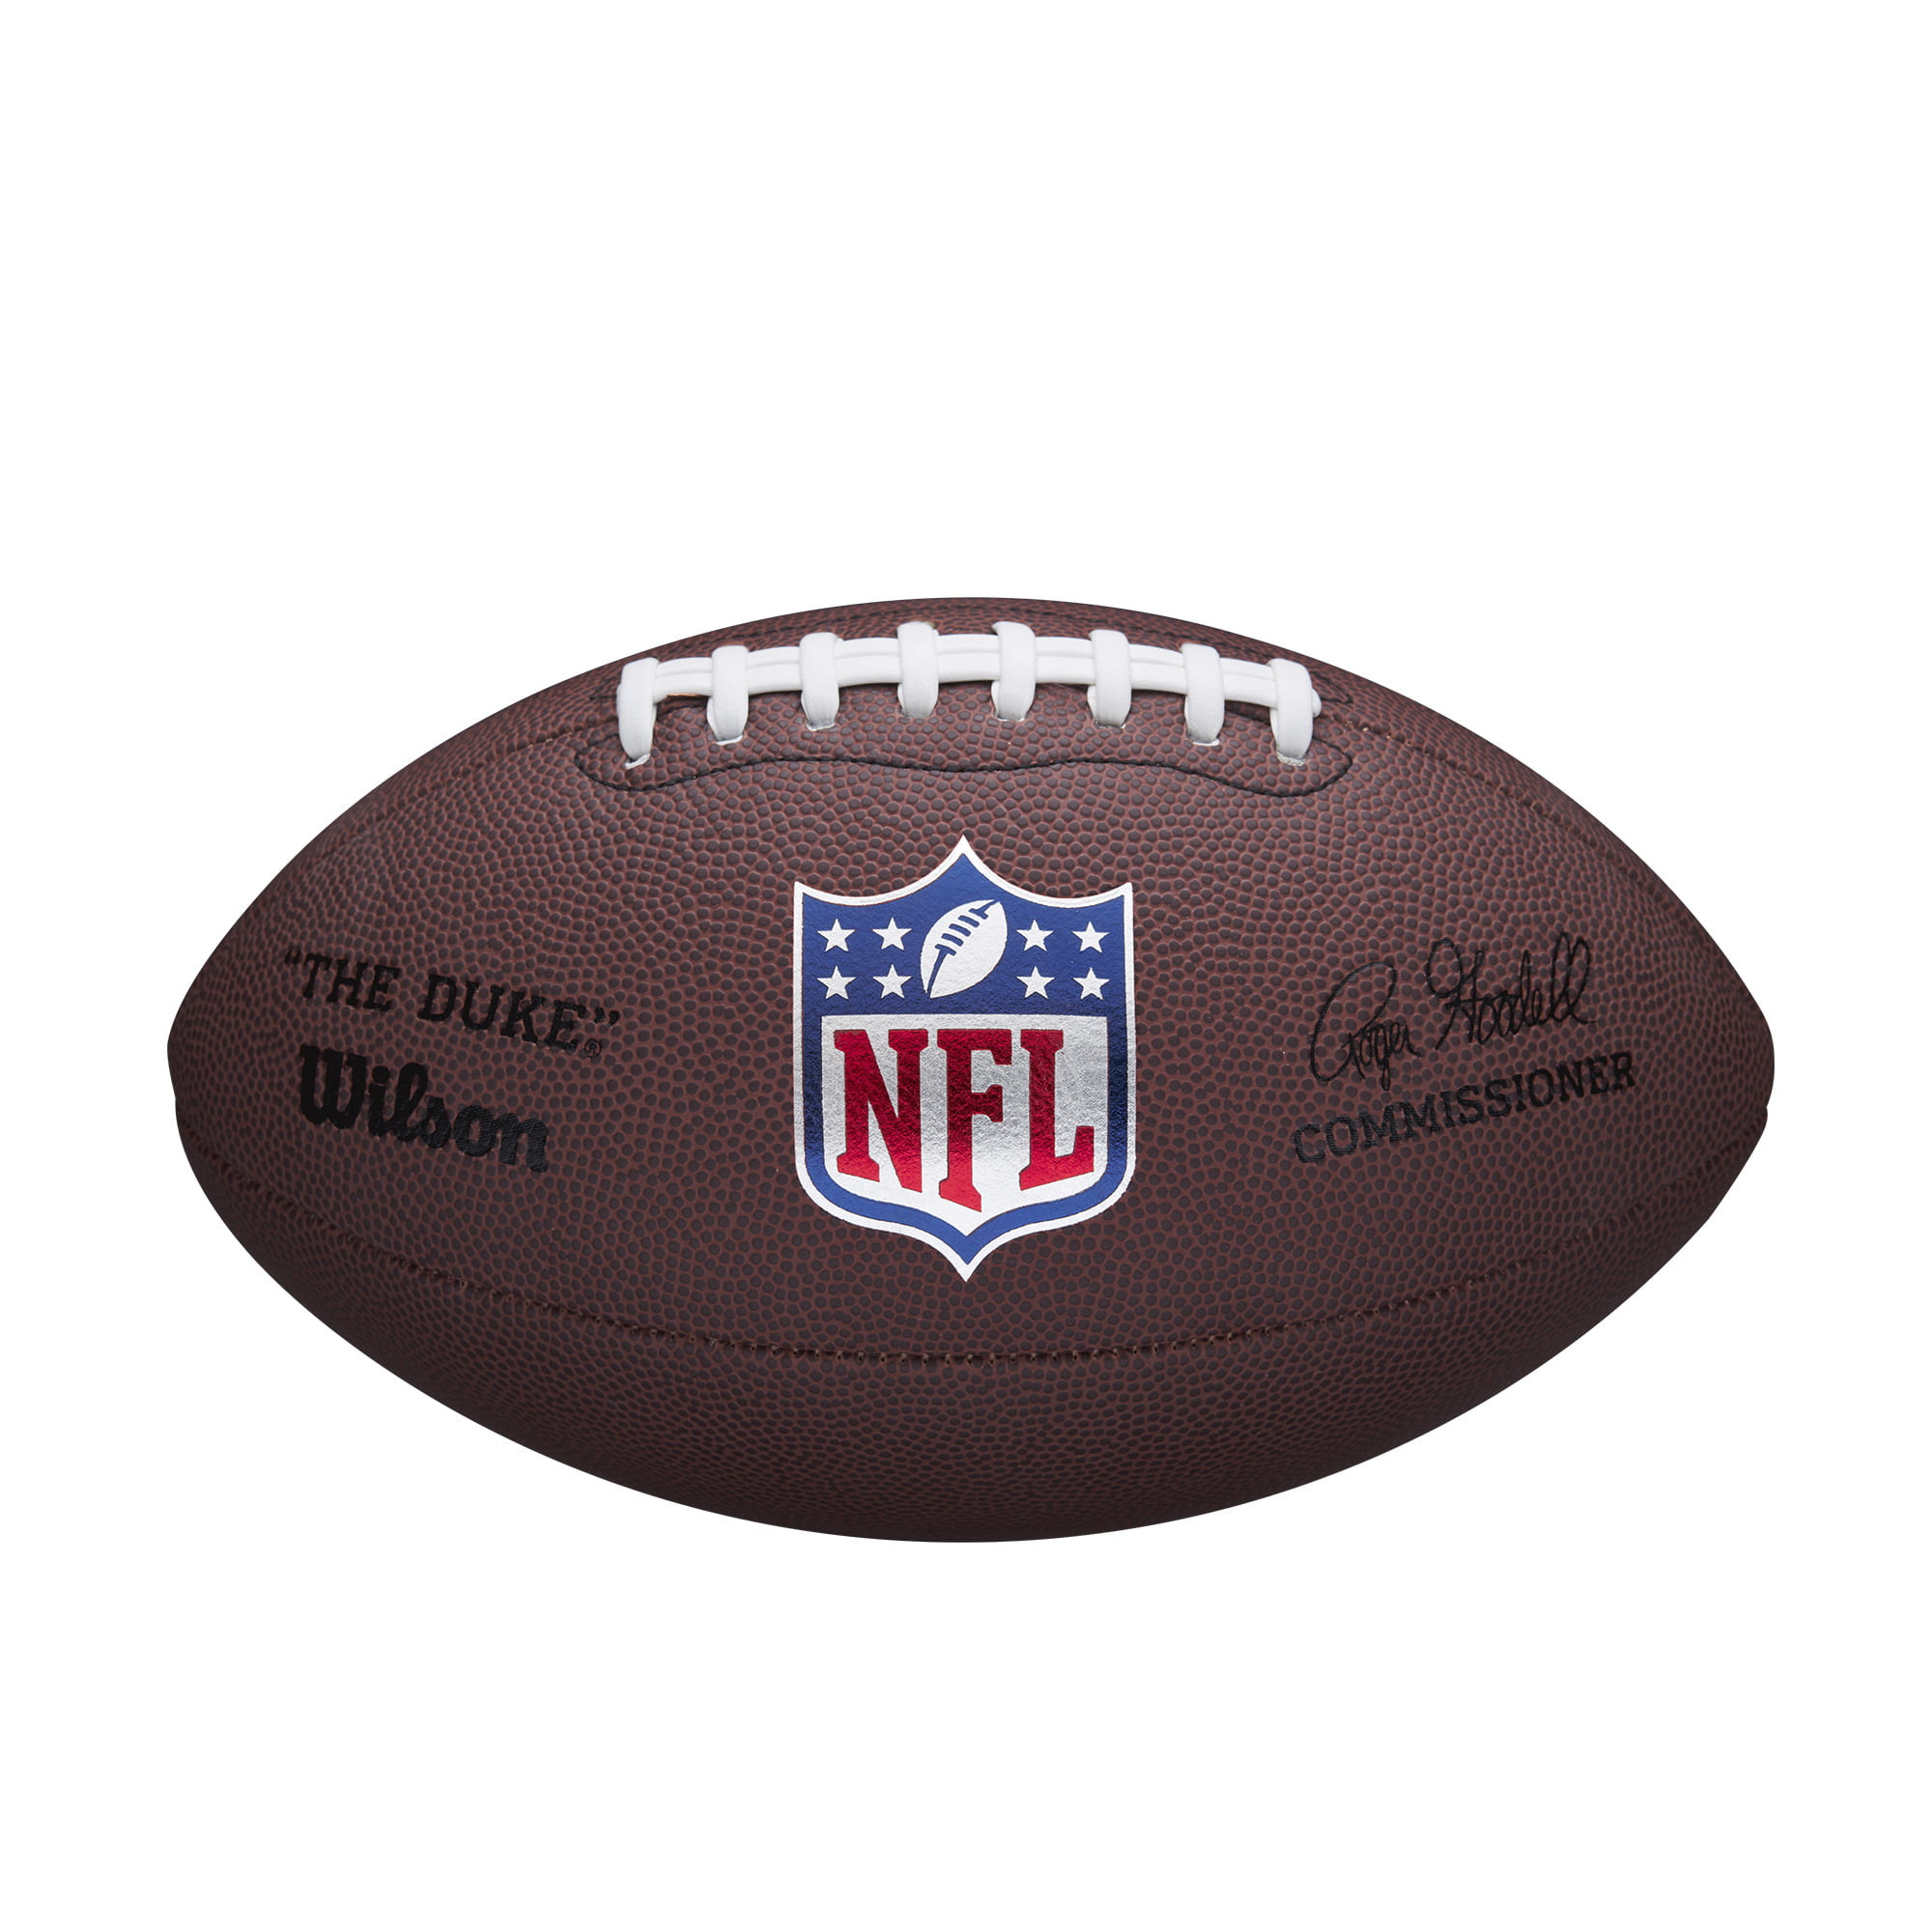 Wilson NFL 'The Duke' Replica Football, Official Size Ages 14 and